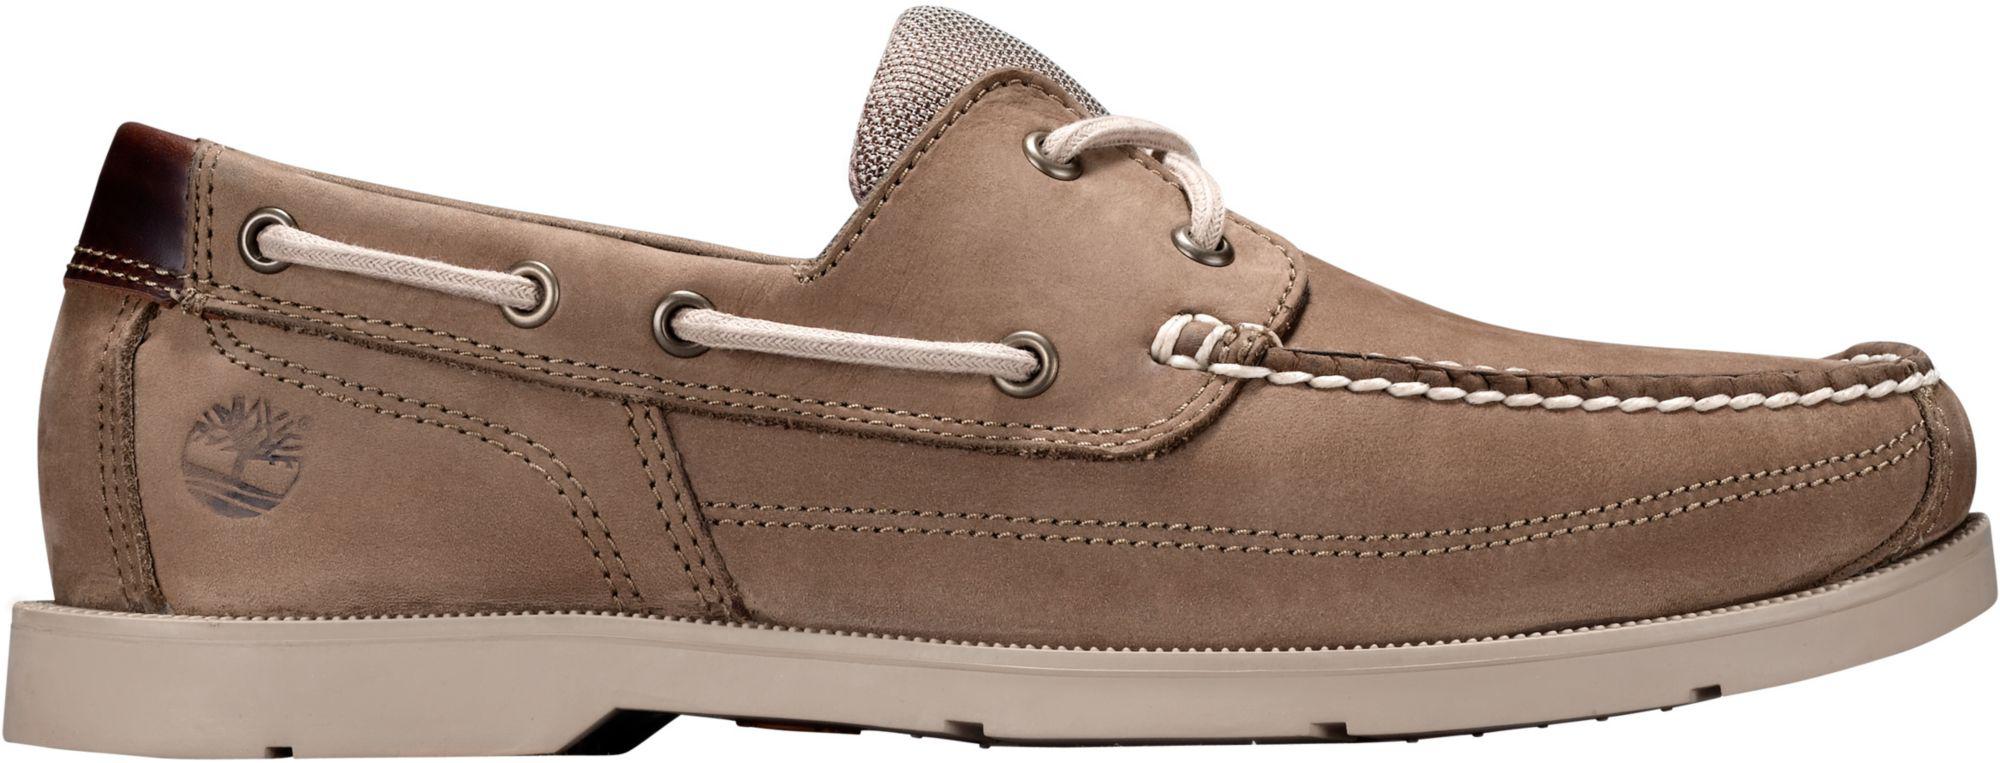 timberland piper cove leather boat shoe